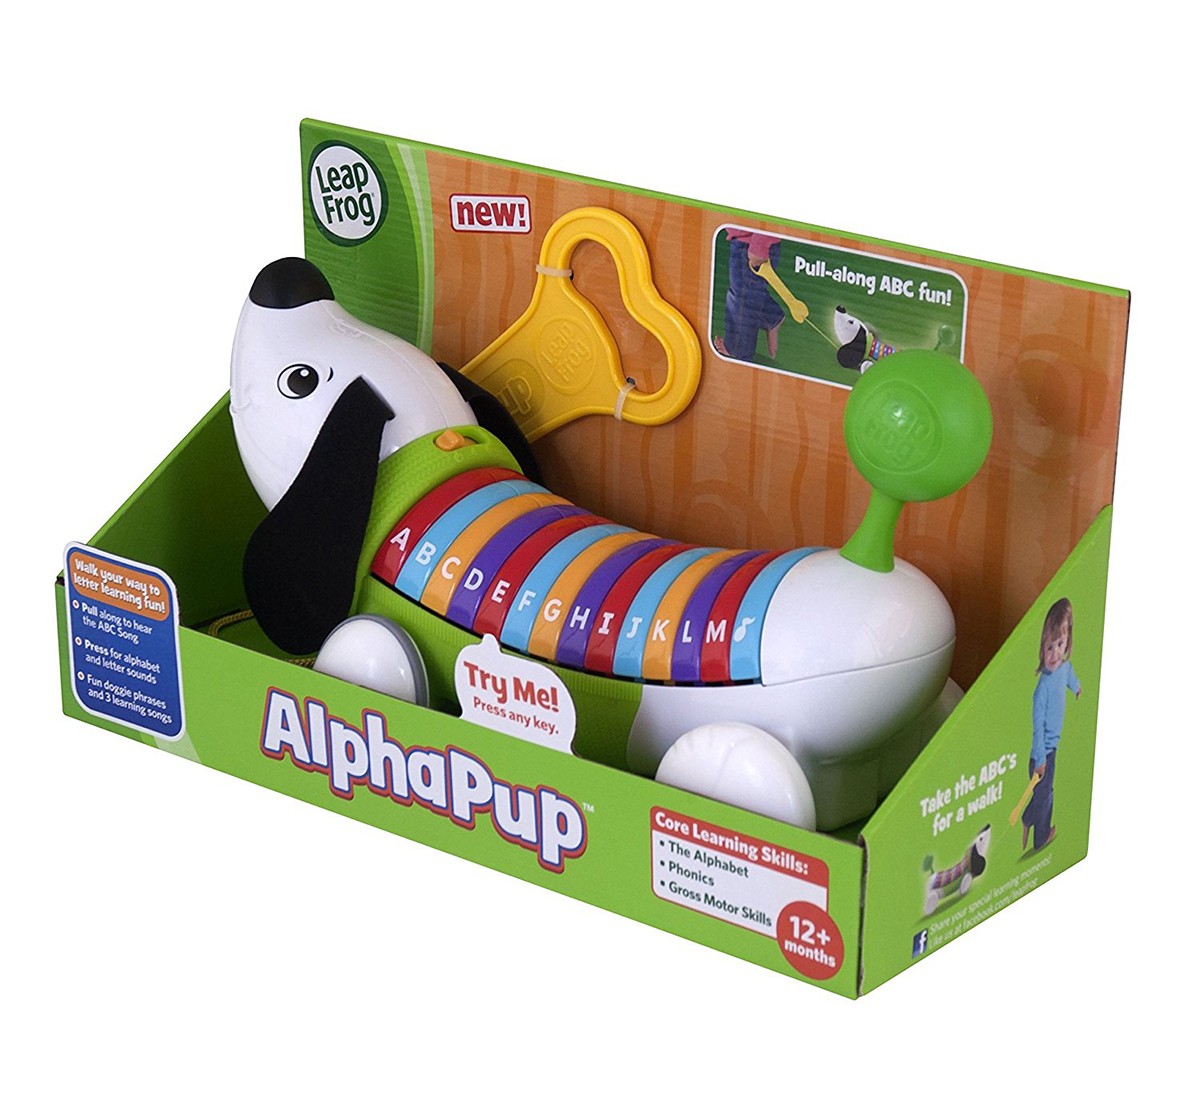  Leapfrog Alphapup Scout, Multi Color Learning Toys for Kids age 12M+ 